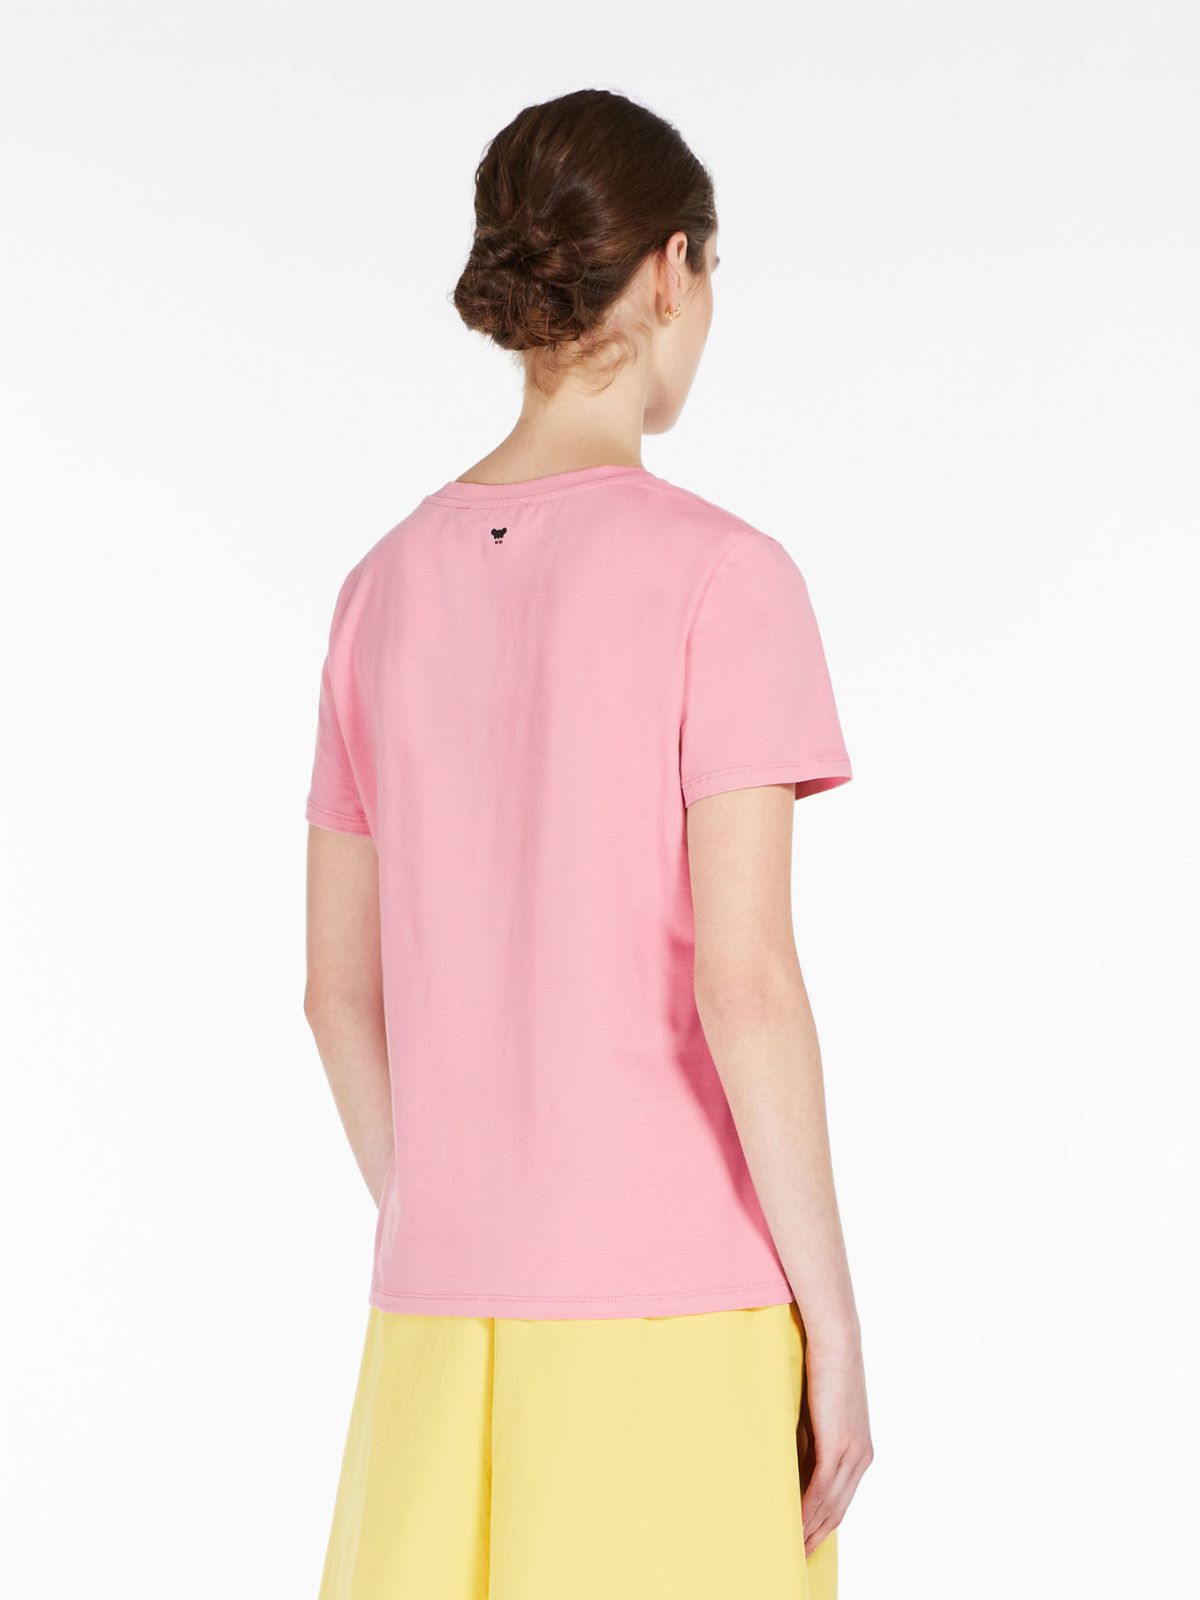 T-shirt in printed jersey - ANTIQUE ROSE - Weekend Max Mara - 3